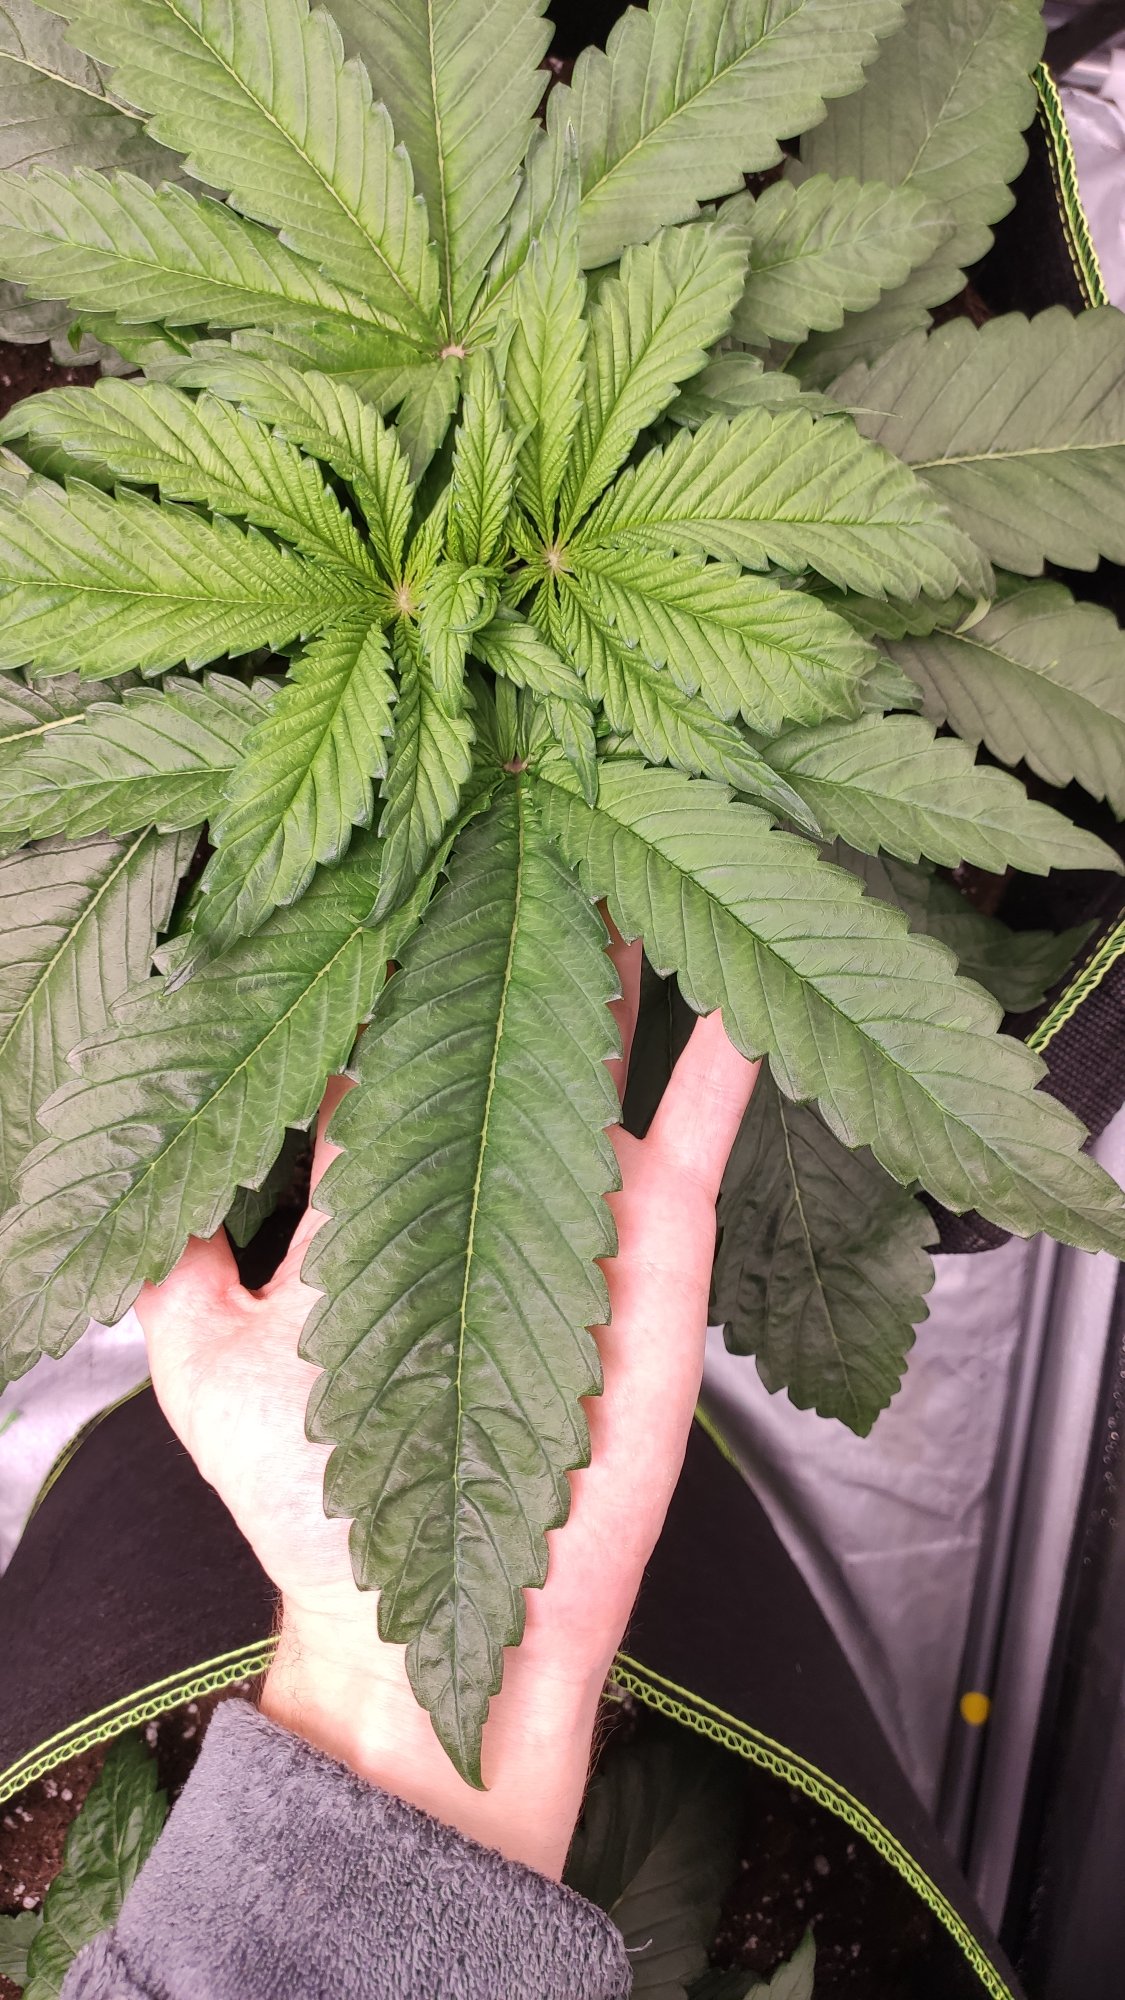 Did i get lucky on a phenotype very explosive growth 4